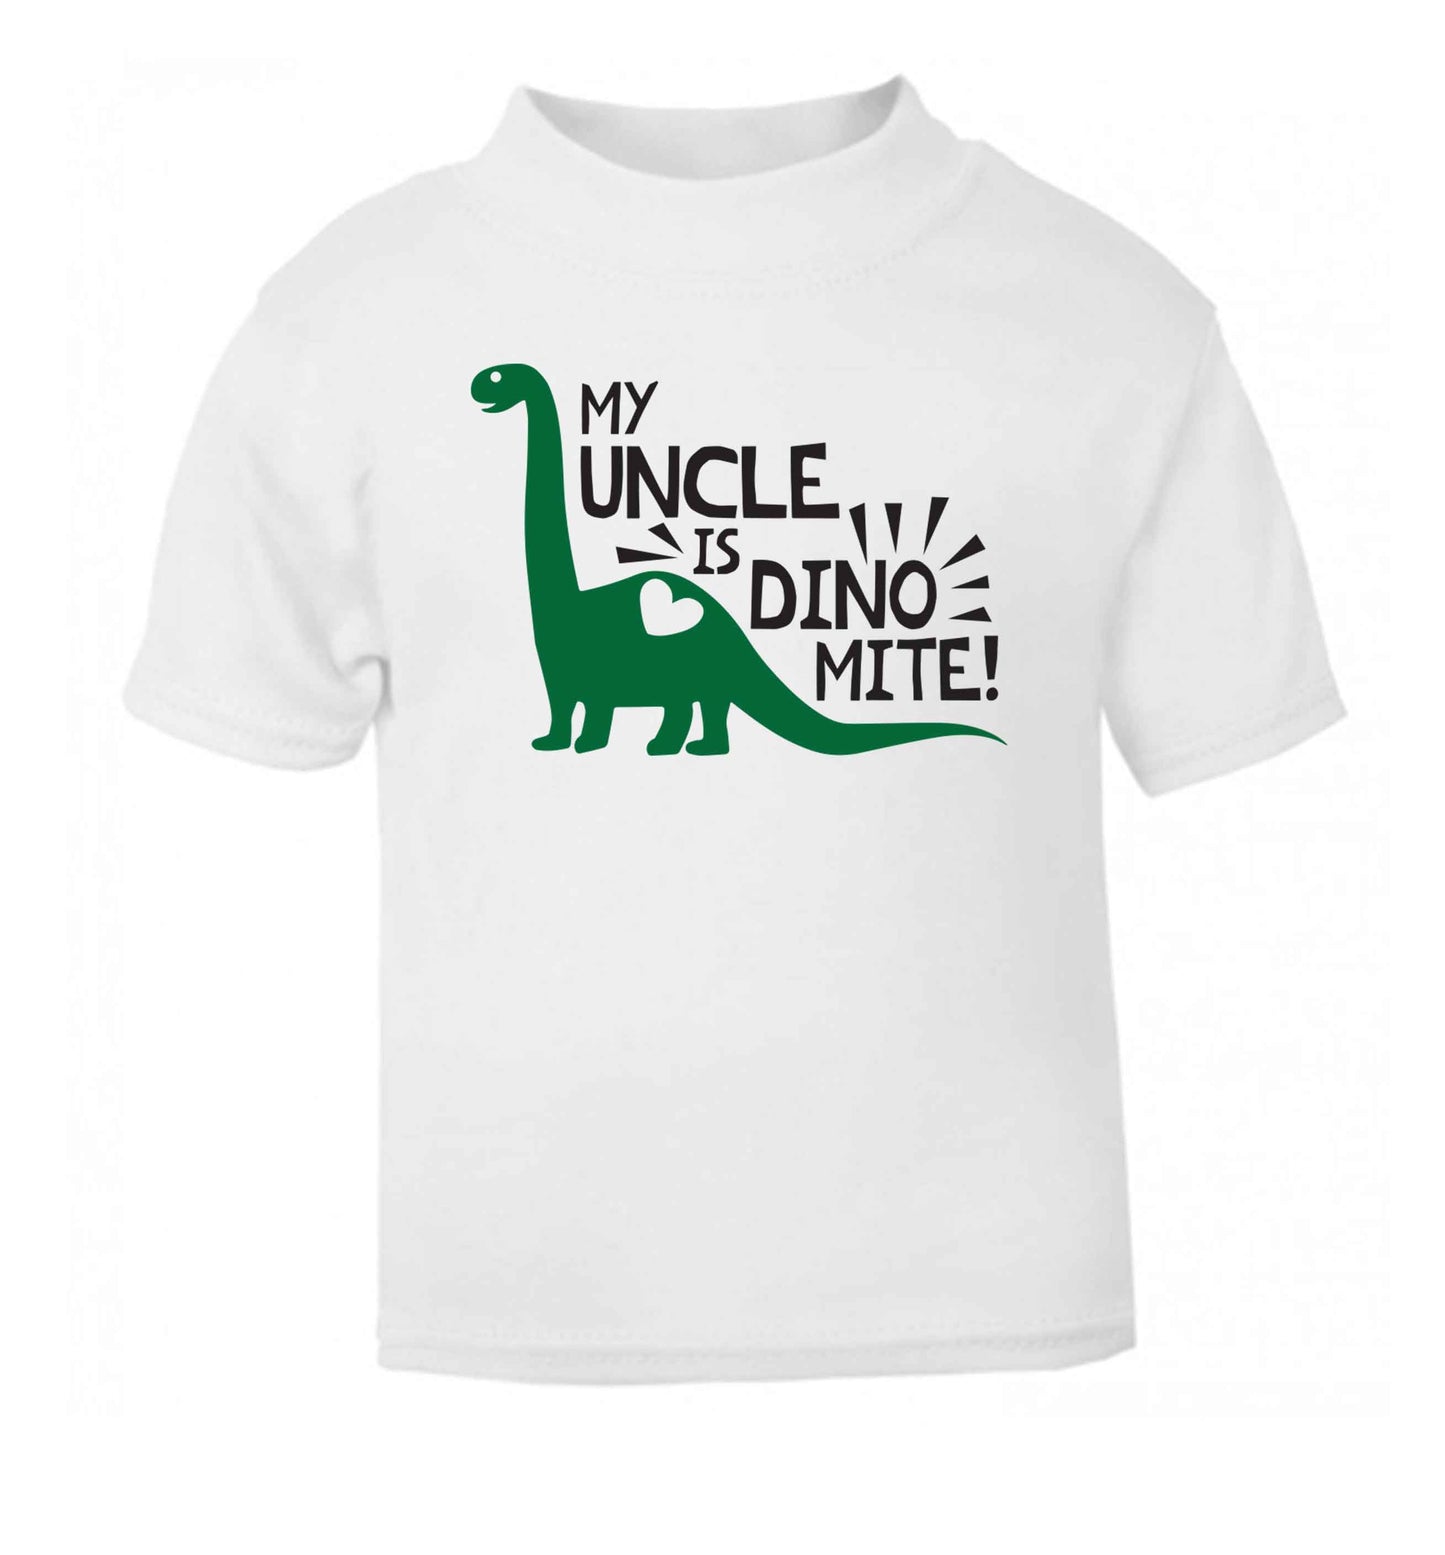 My uncle is dinomite! white Baby Toddler Tshirt 2 Years